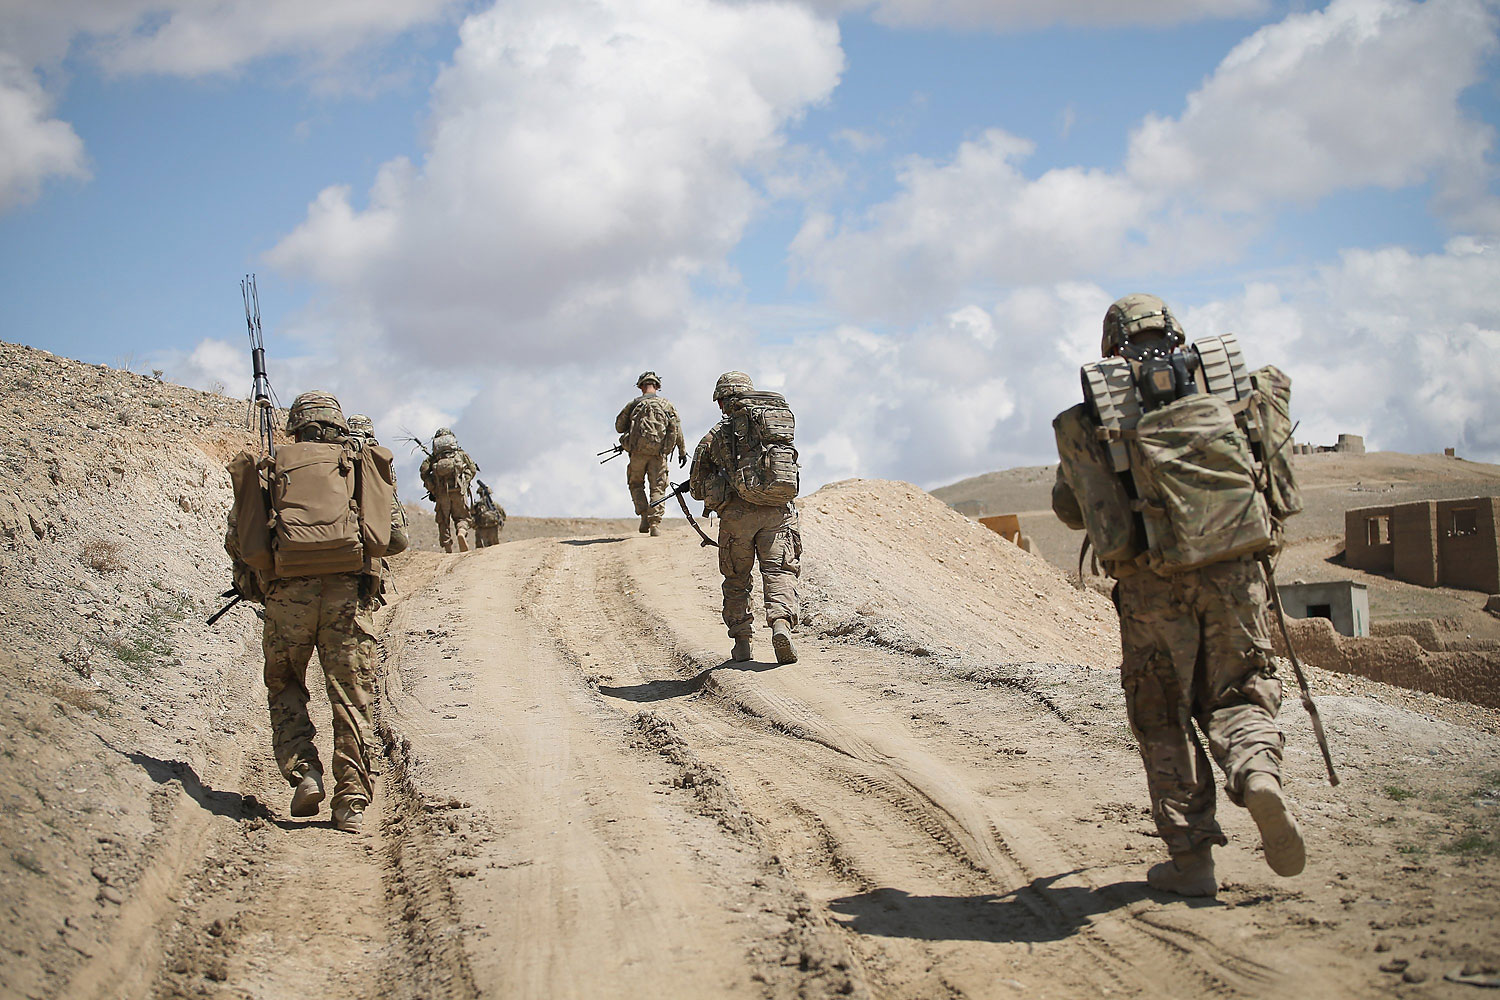 Soldiers with the U.S. Army's 2nd Battalion 87th Infantry Regiment, 3rd Brigade Combat Team, 10th Mountain Division patrol on the edge of a village outside of Forward Operating Base Shank on March 29, 2014 near Pul-e Alam, Afghanistan.